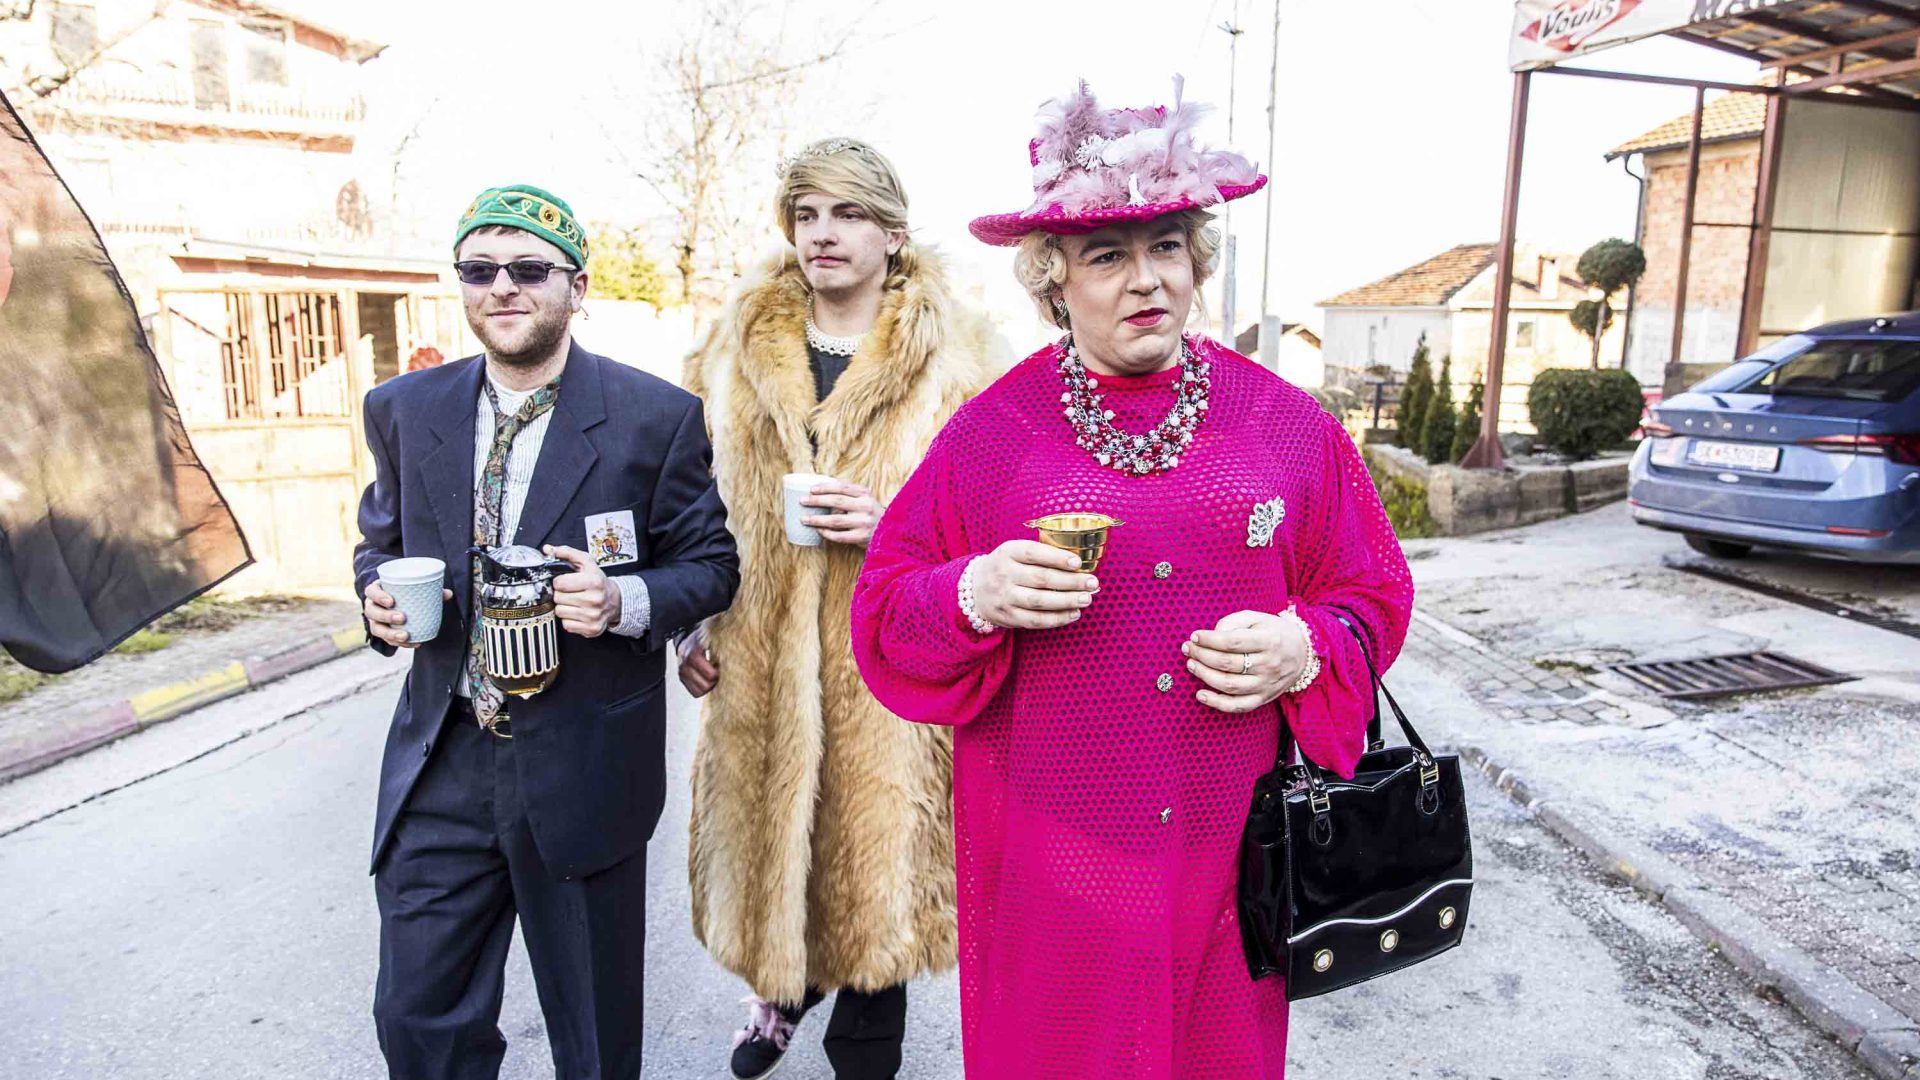 Three people walk down the street, one dressed as the Queen.